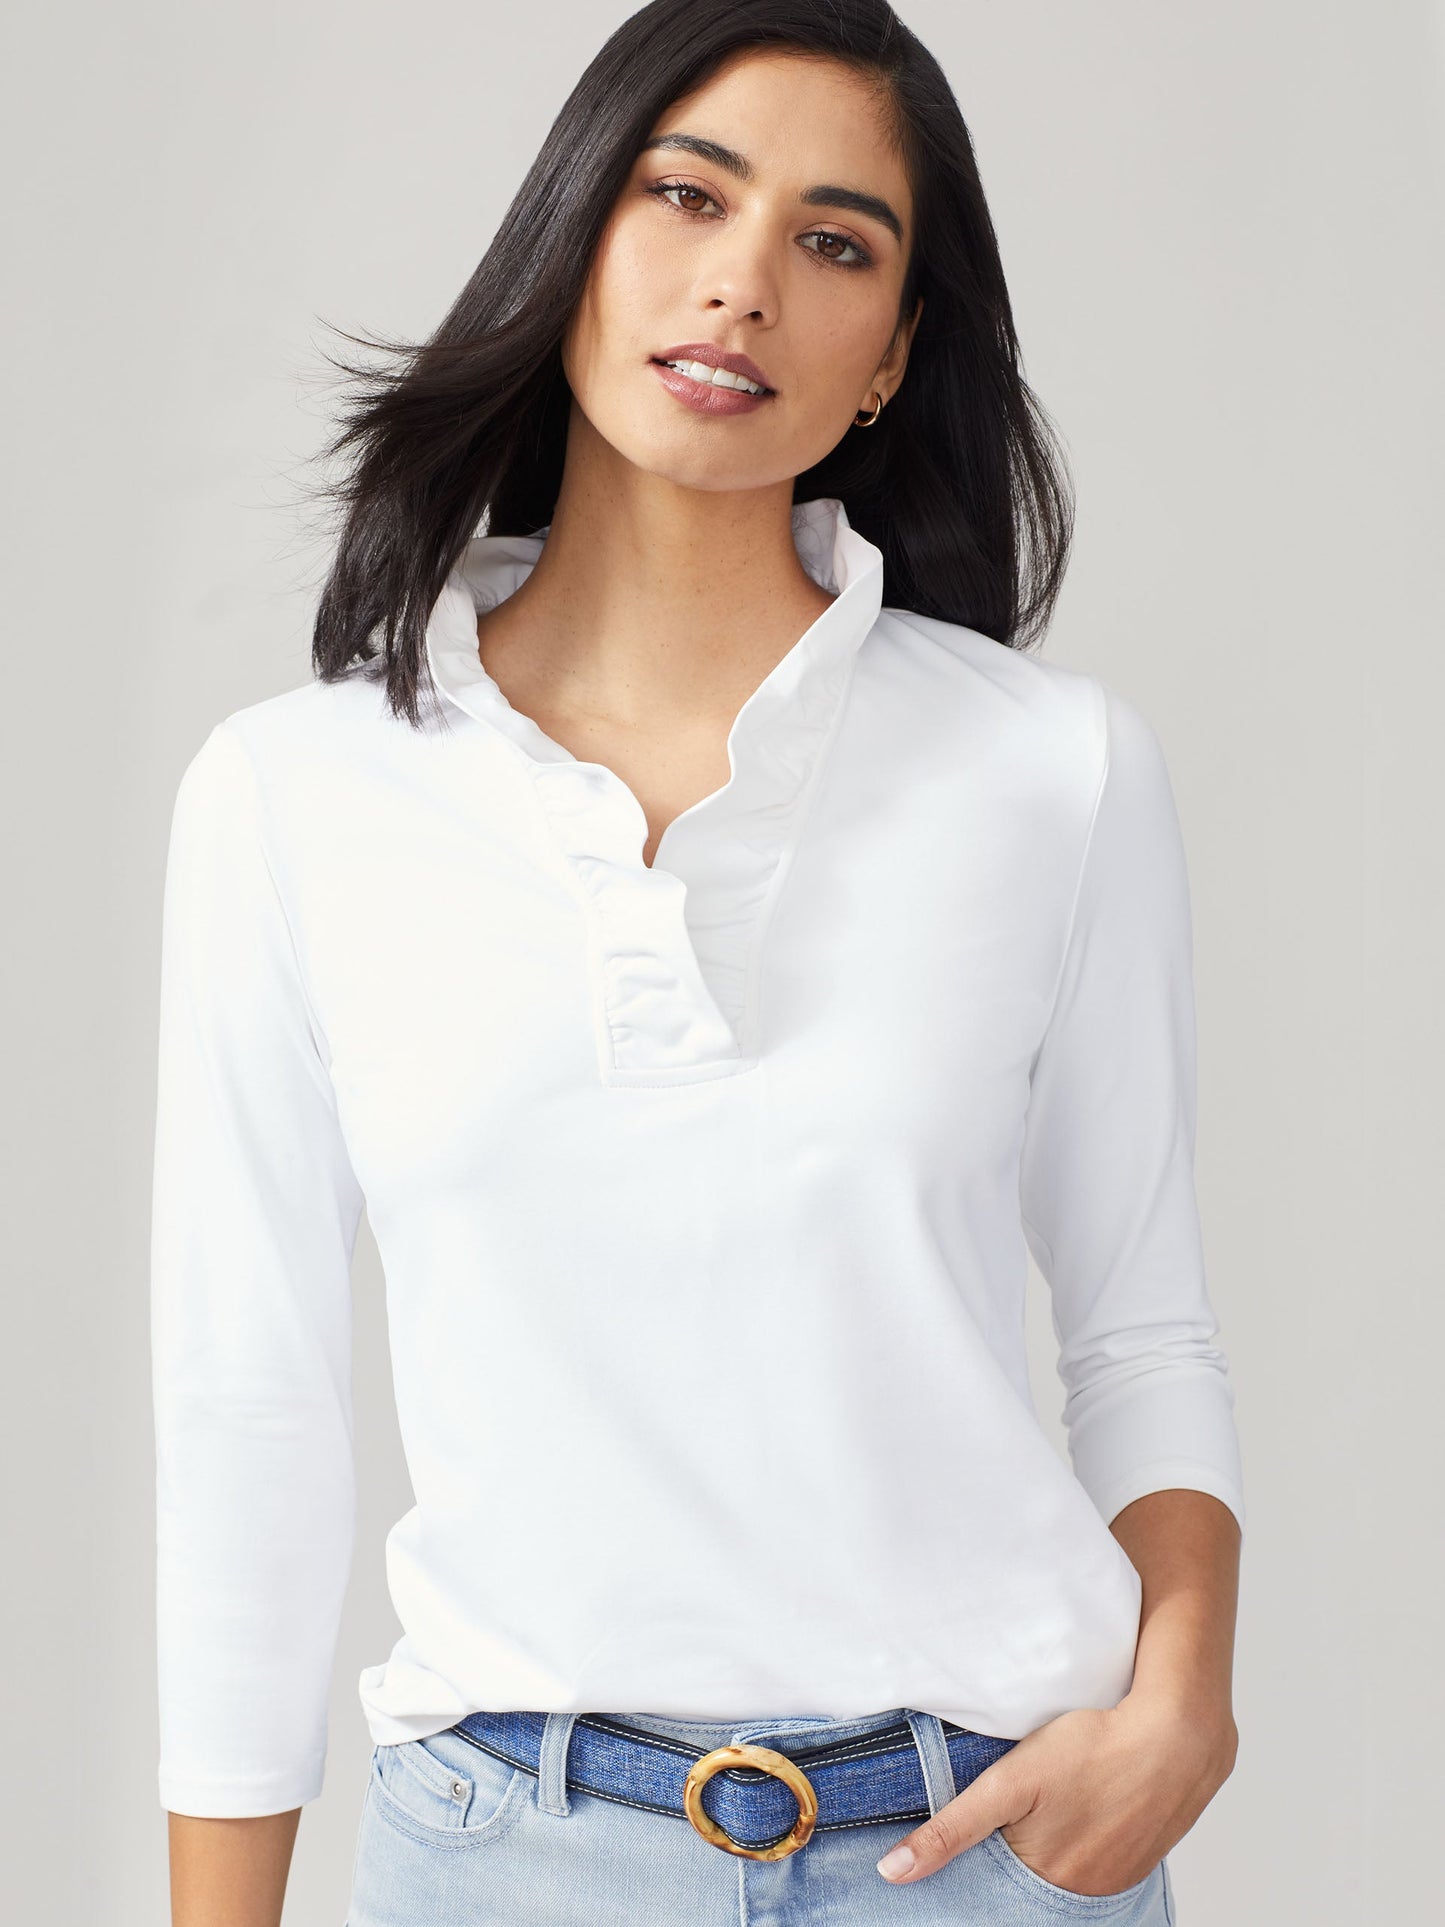 Model wearing J.McLaughlin Durham ruffle top in white made with Catalina cloth.